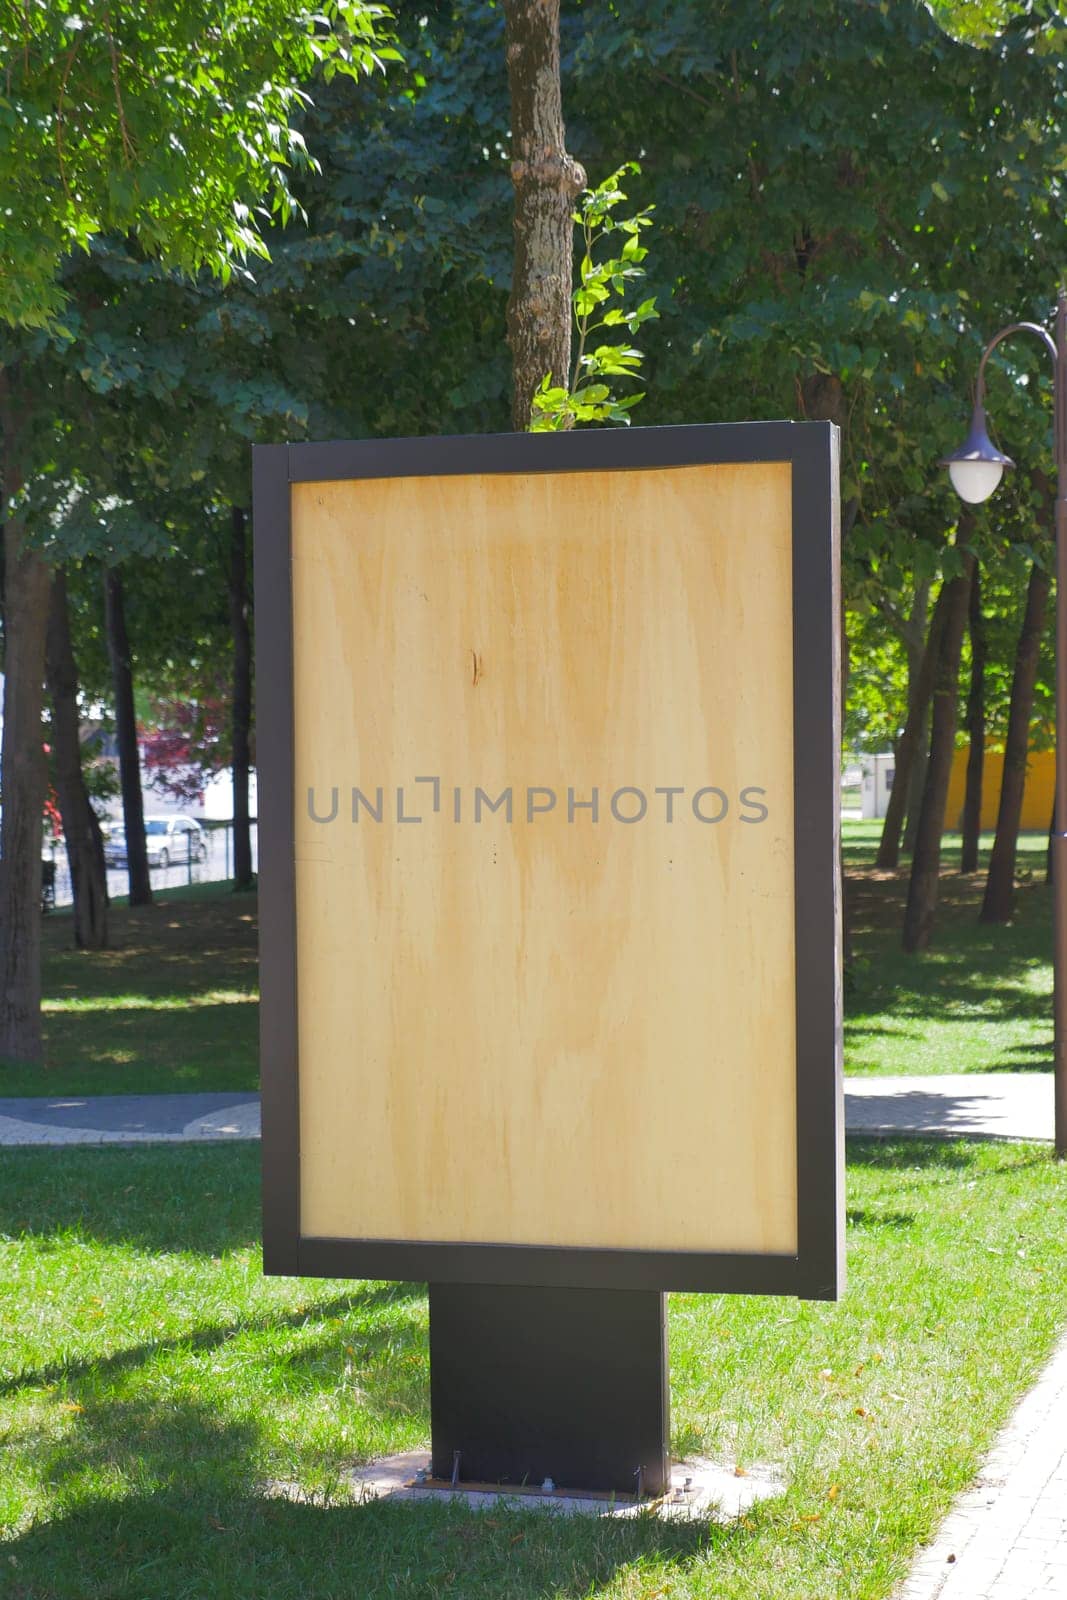 A wooden billboard stands in the park,